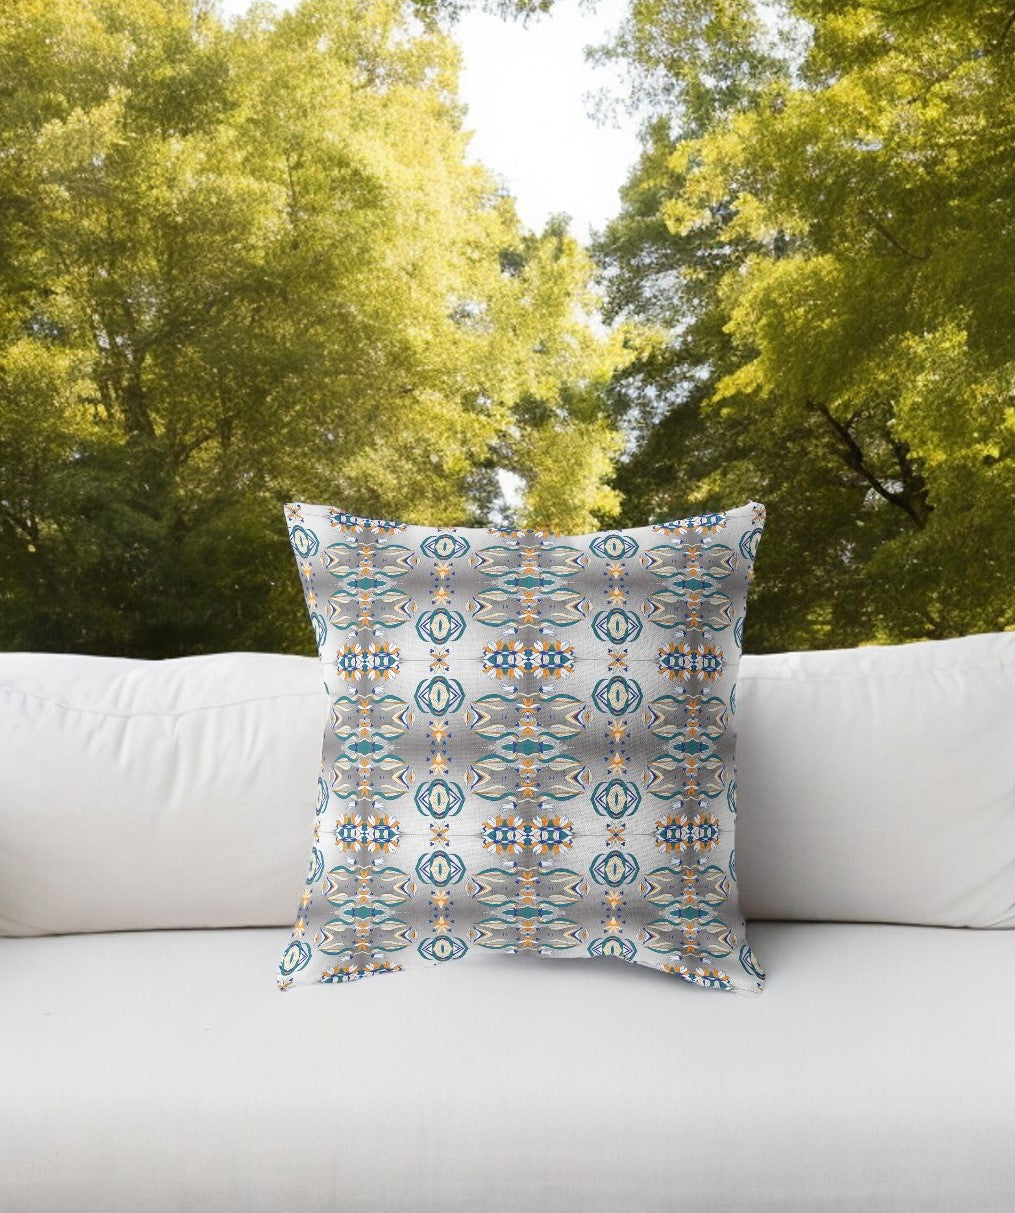 16” White Brown Patterned Indoor Outdoor Zippered Throw Pillow